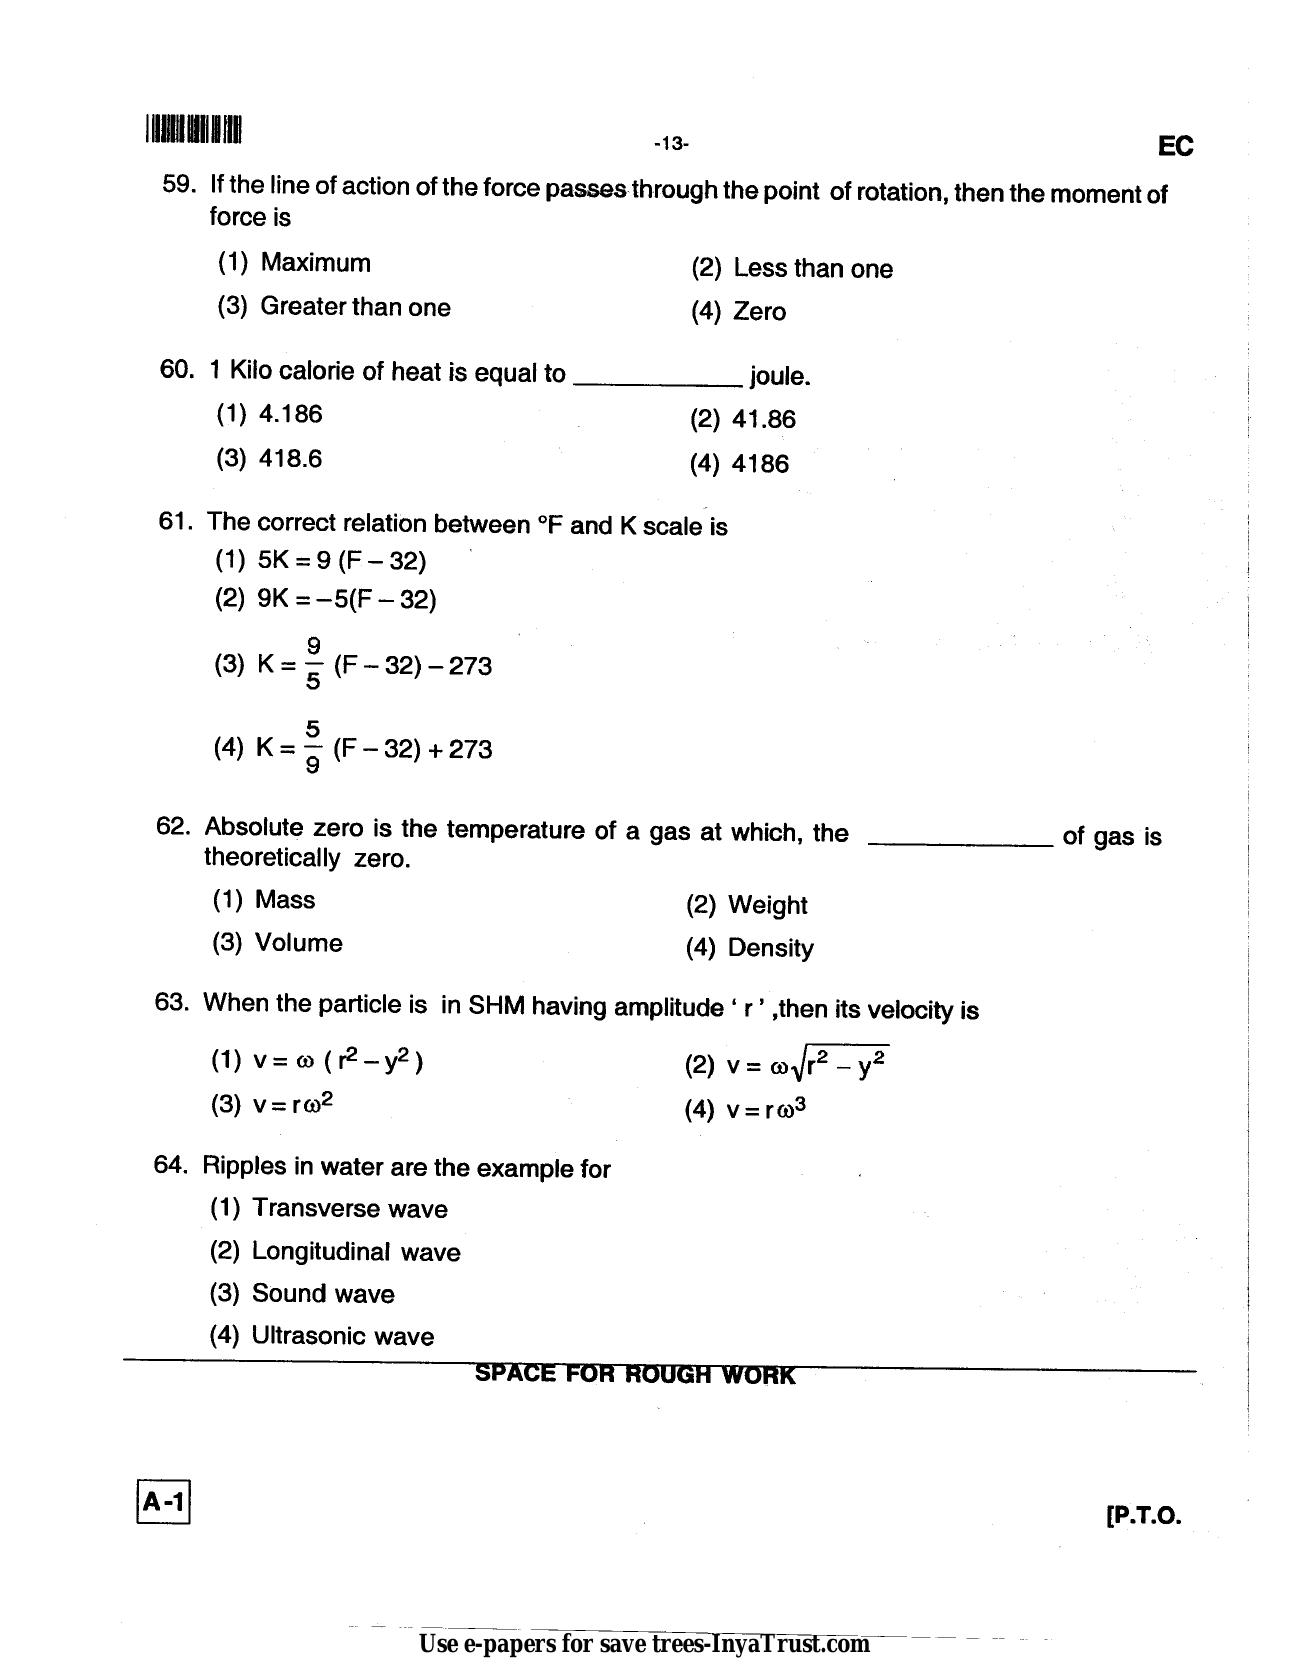 Karnataka Diploma CET- 2013 Electronics and Communication Engineering Question Paper - Page 13